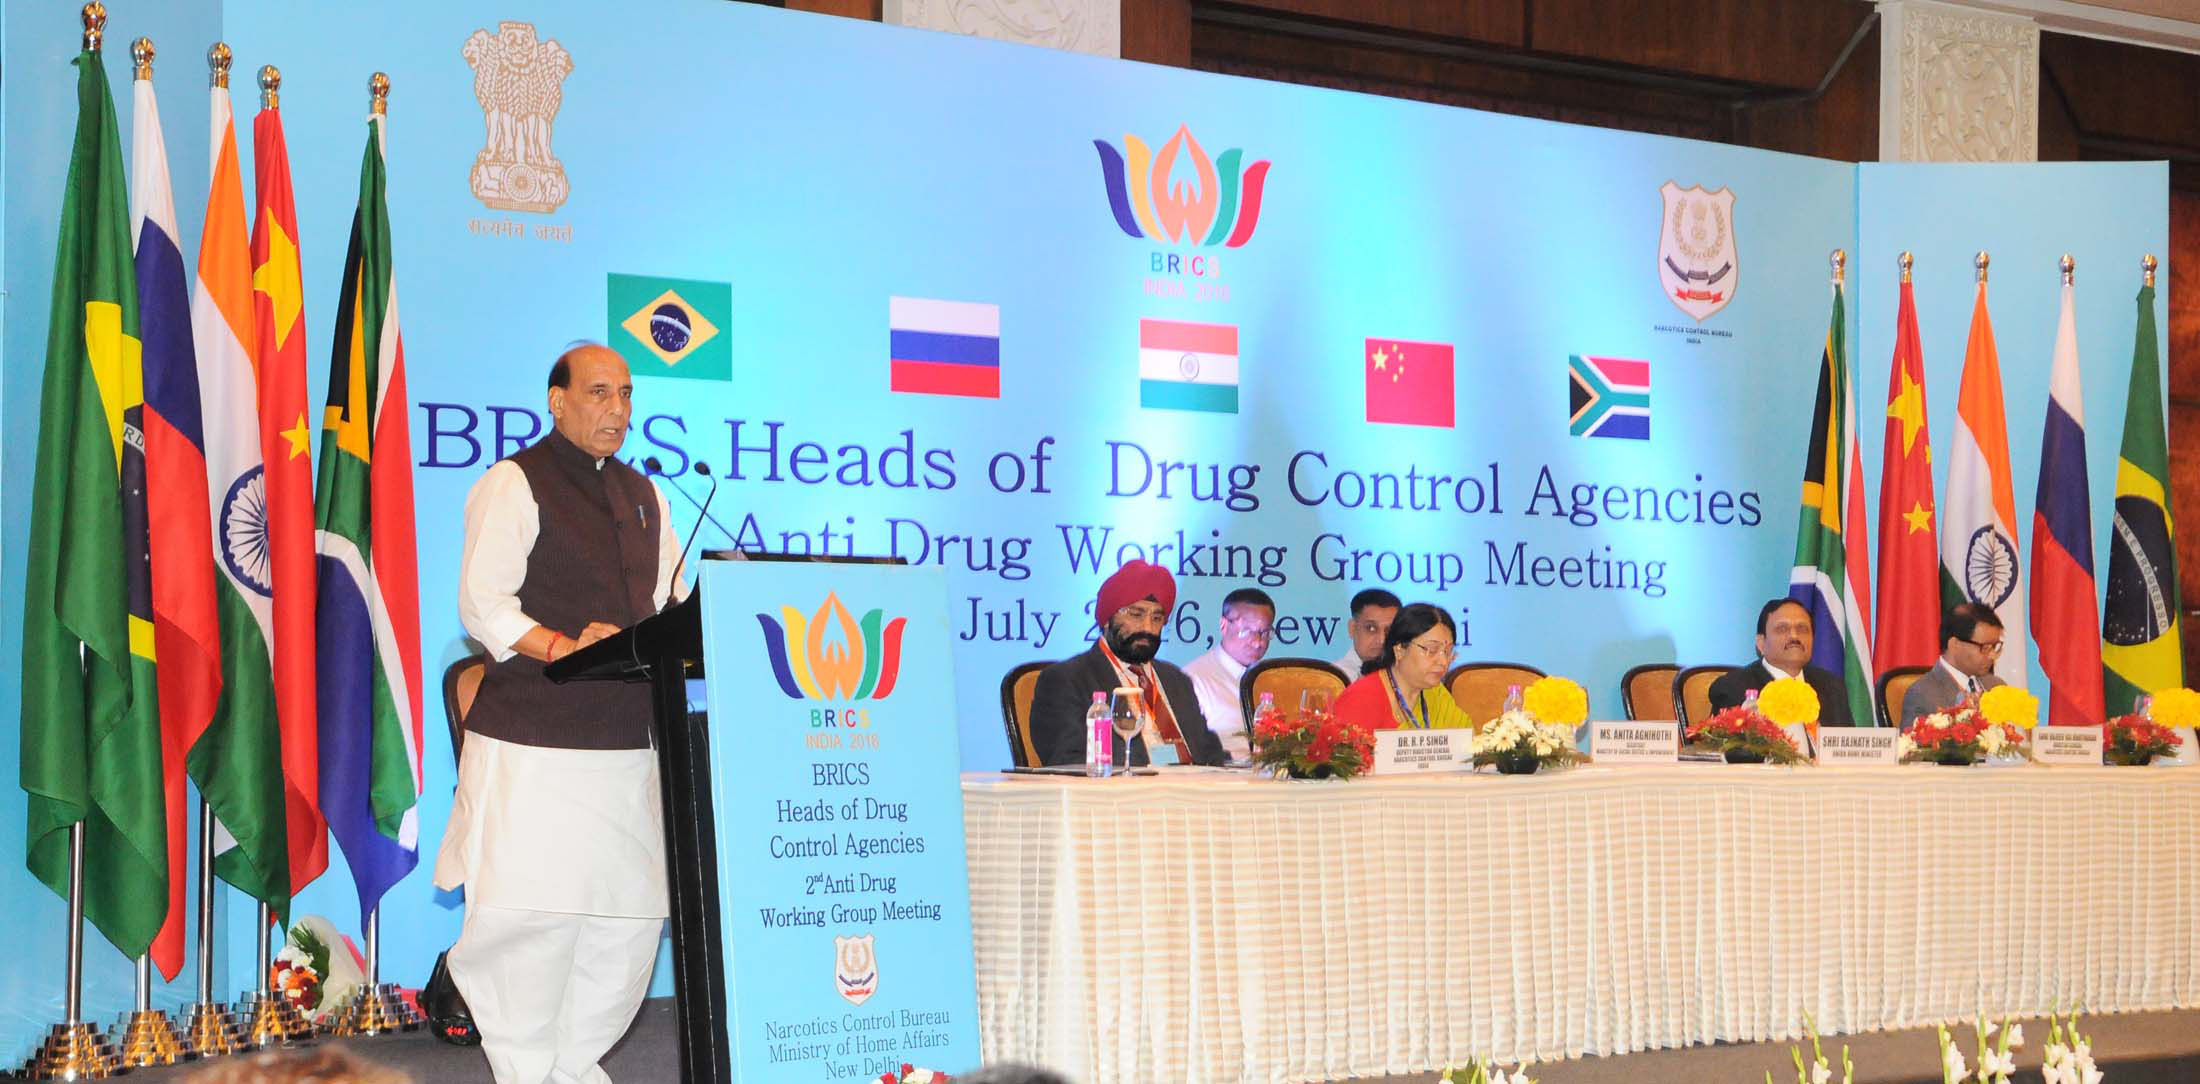 The Union Home Minister, Shri Rajnath Singh addressing at the inauguration of the BRICS Heads of Drug Control Agencies Working Group Meeting, in New Delhi on July 08, 2016.  The Secretary, Ministry of Social Justice and Empowerment, Ms. Anita Agnihotri and other dignitaries are also seen.